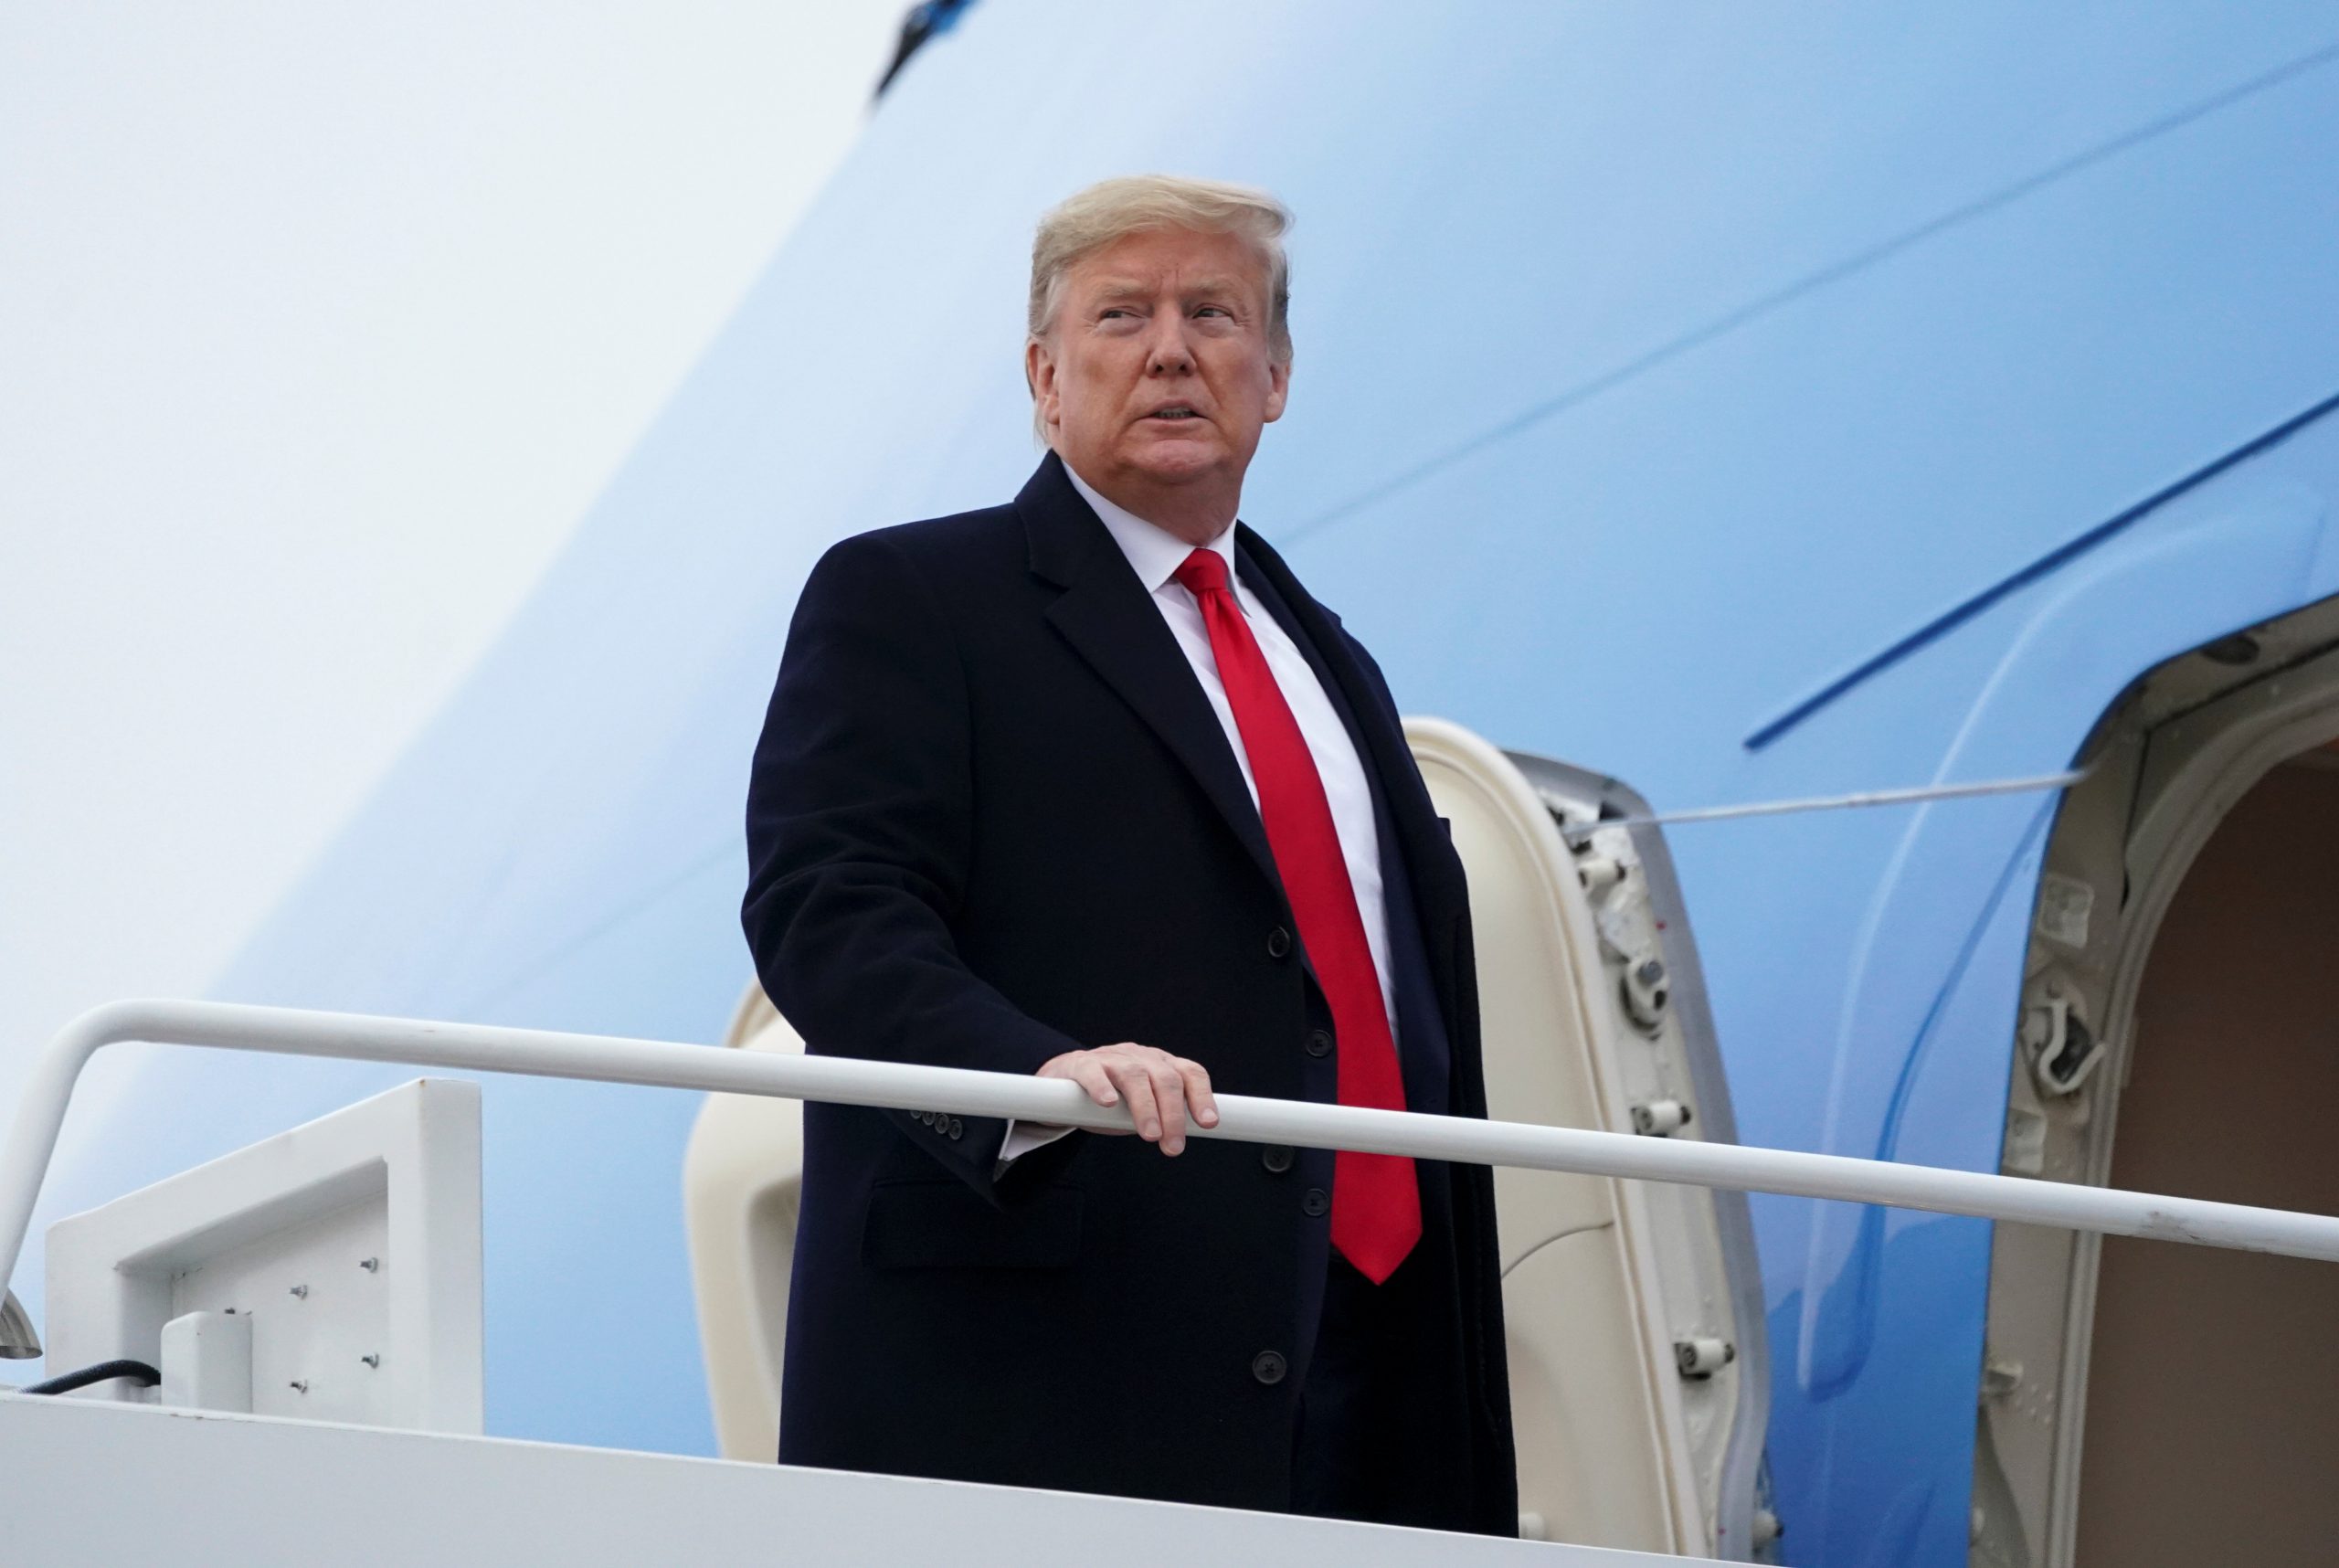 Trump departs Joint Base Andrews in Maryland